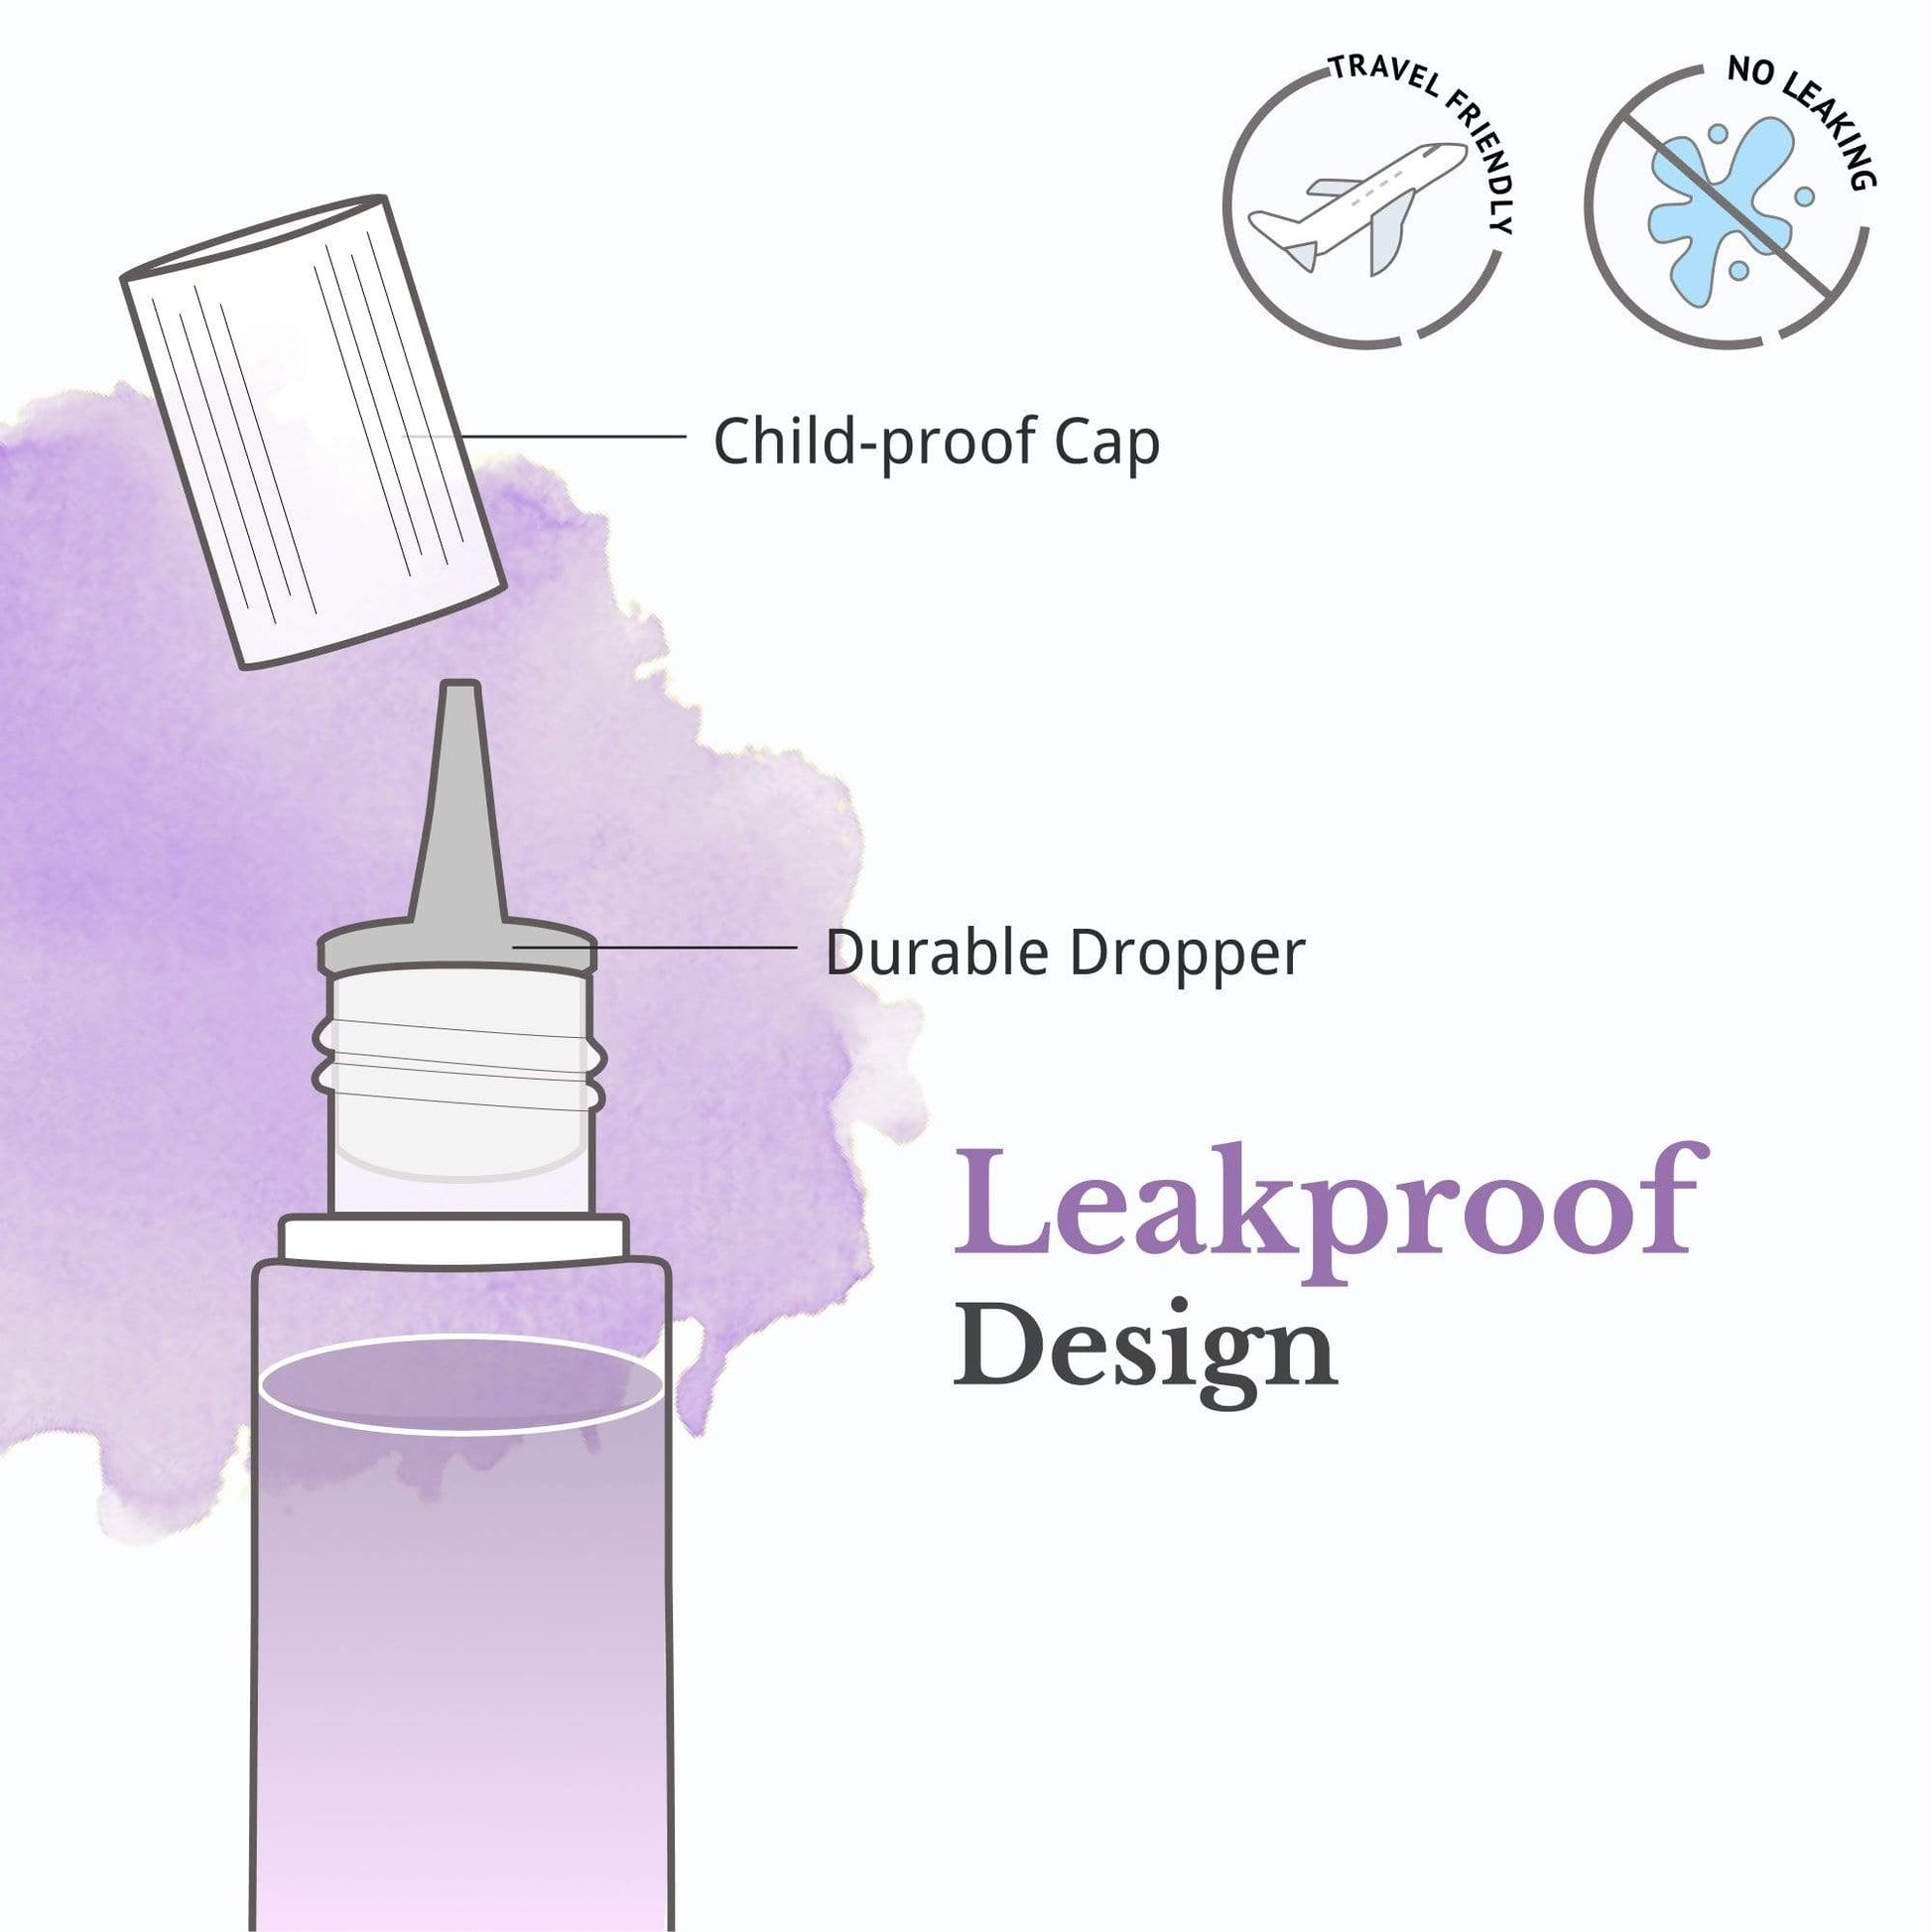 Leak proof design with child proof cap and durable dropper. Travel friendly